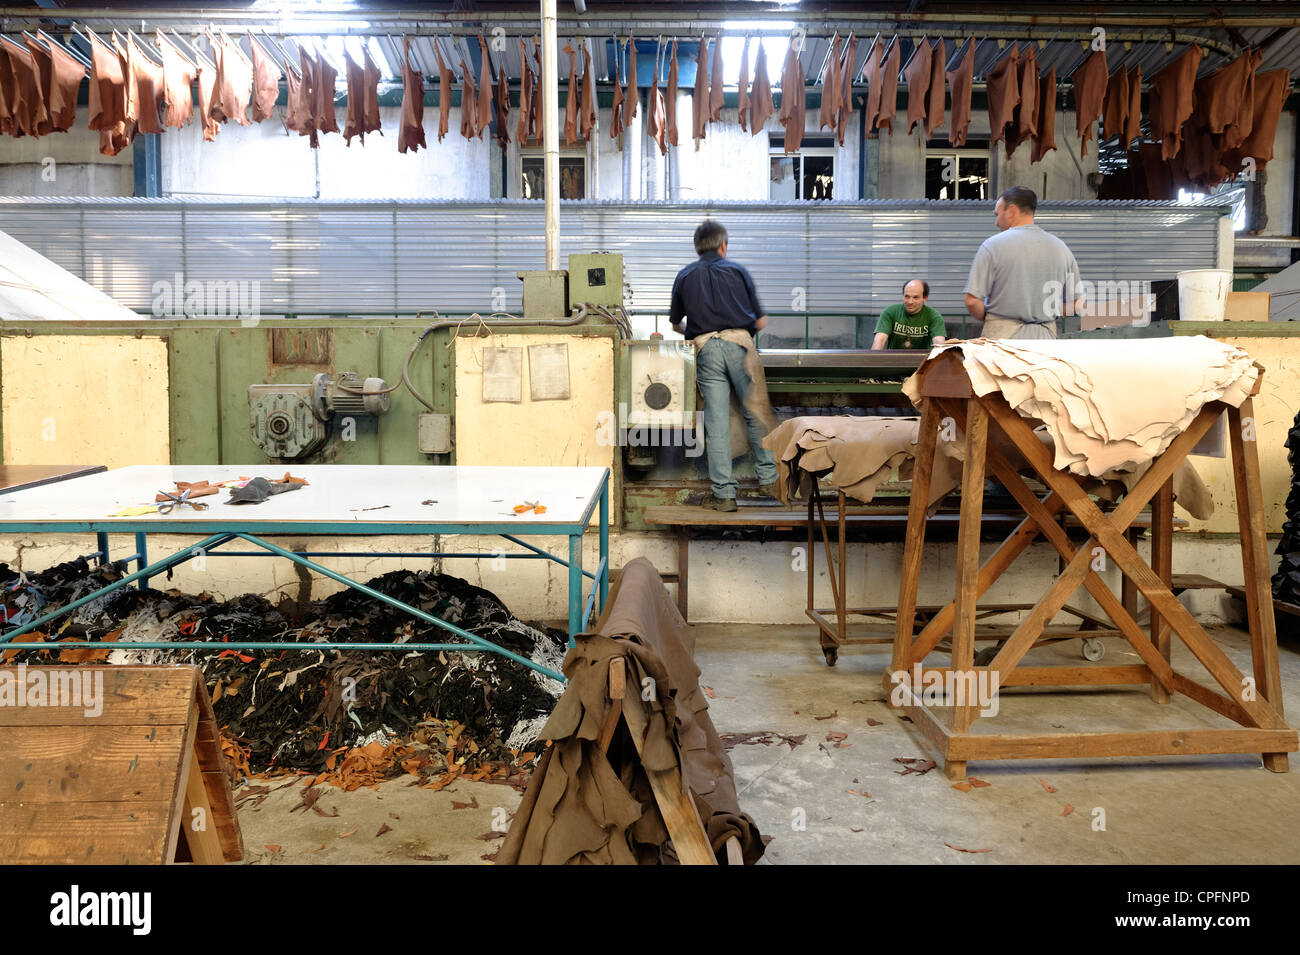 People working with leather at an industrial tannery in Portugal Stock Photo